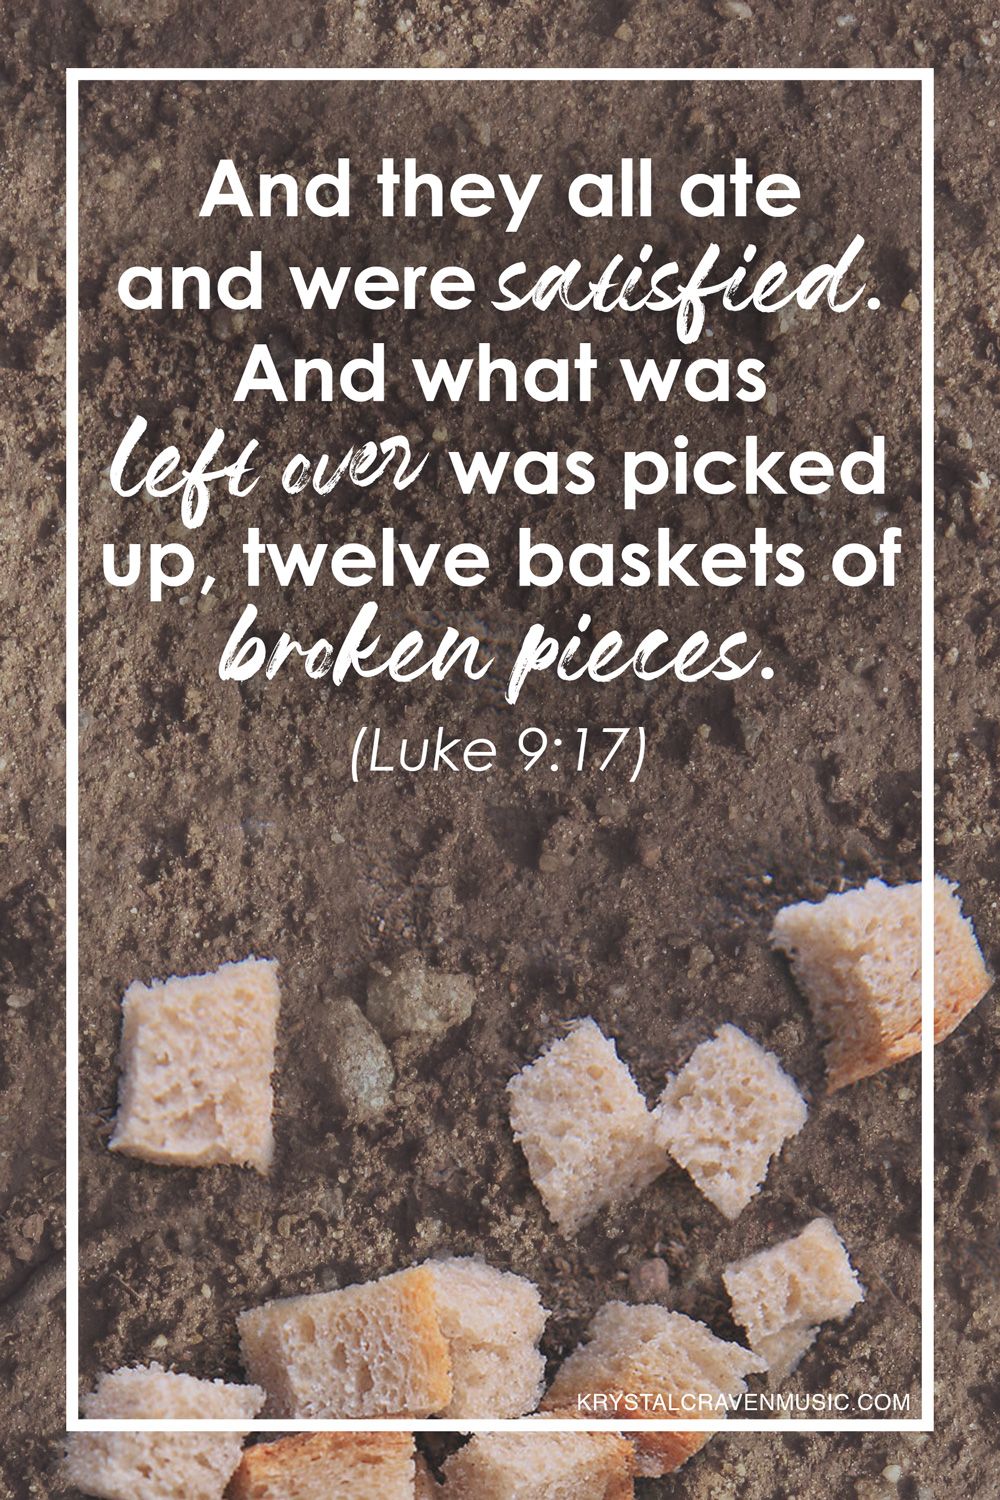 The text from Luke 9:17, "And they all ate and were satisfied. And what was left over was picked up, twelve baskets of broken pieces." The text is overlaying broken pieces of bread laying on dirt.